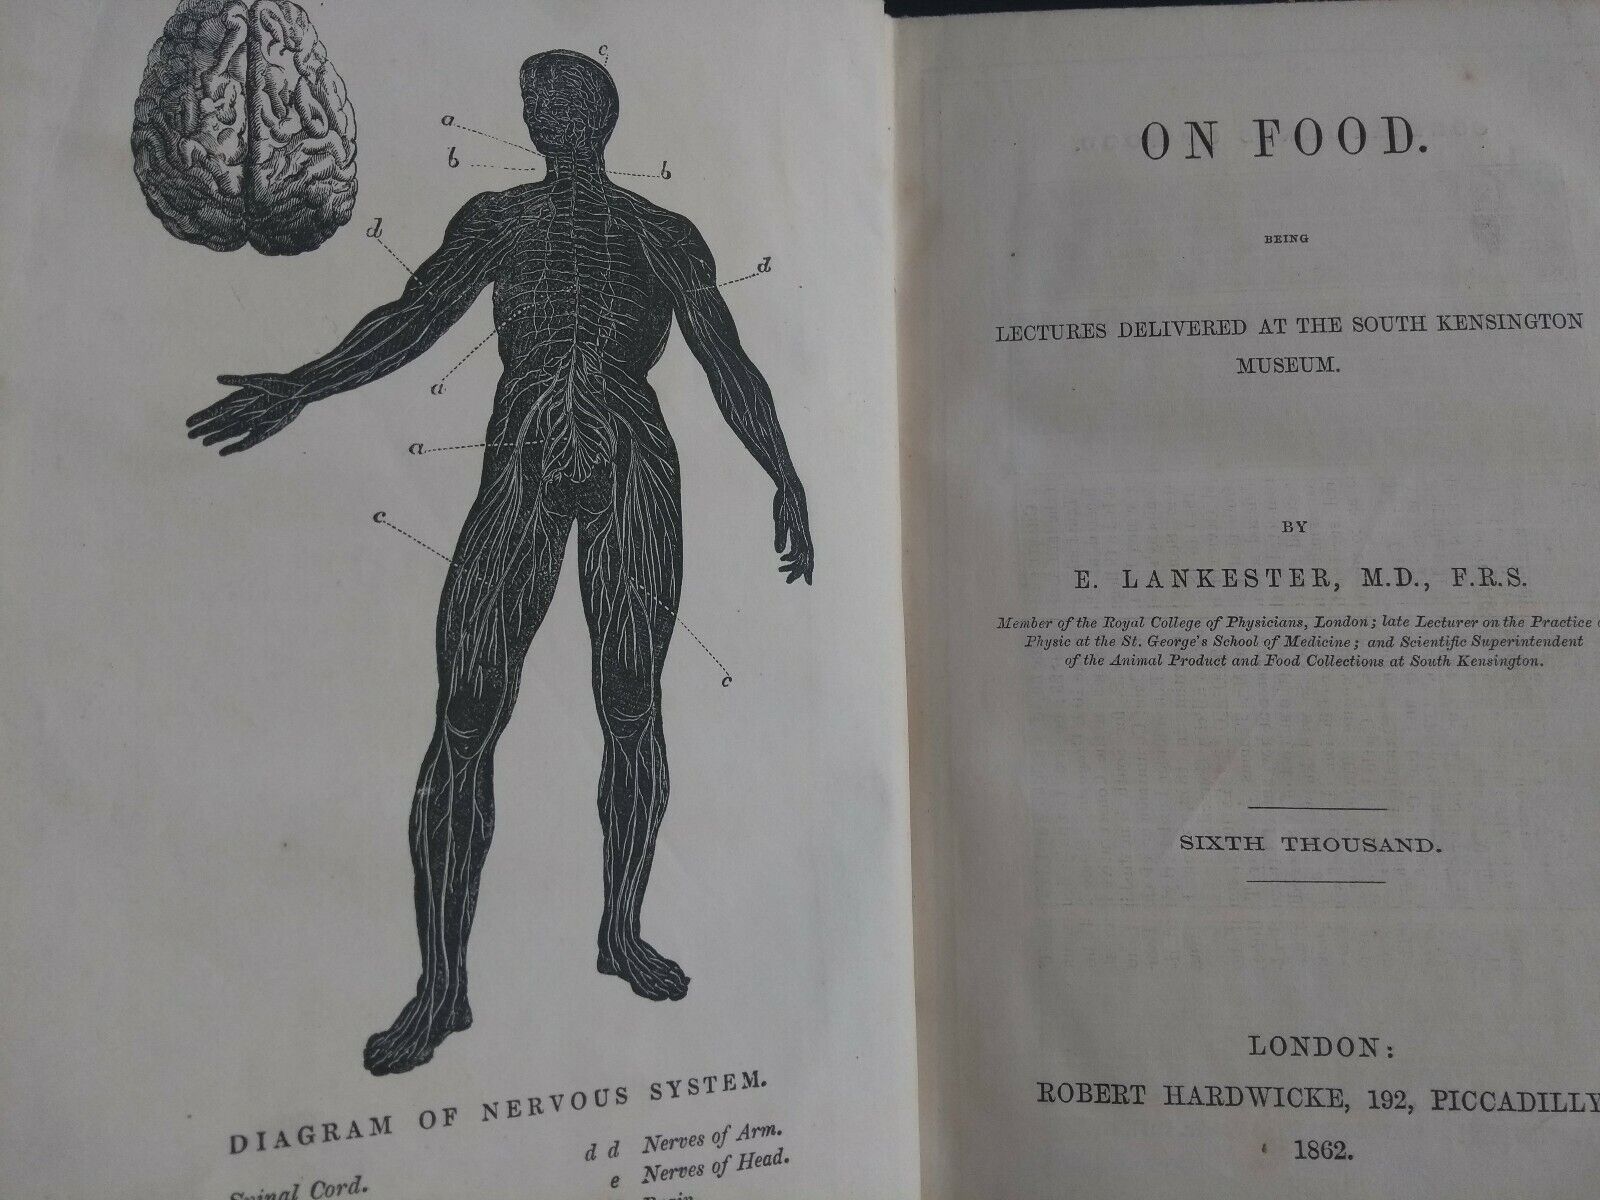 Rare Old Cookery Book. On Food book by E.Lankester M.D 1862. Lectures S.K.Museum